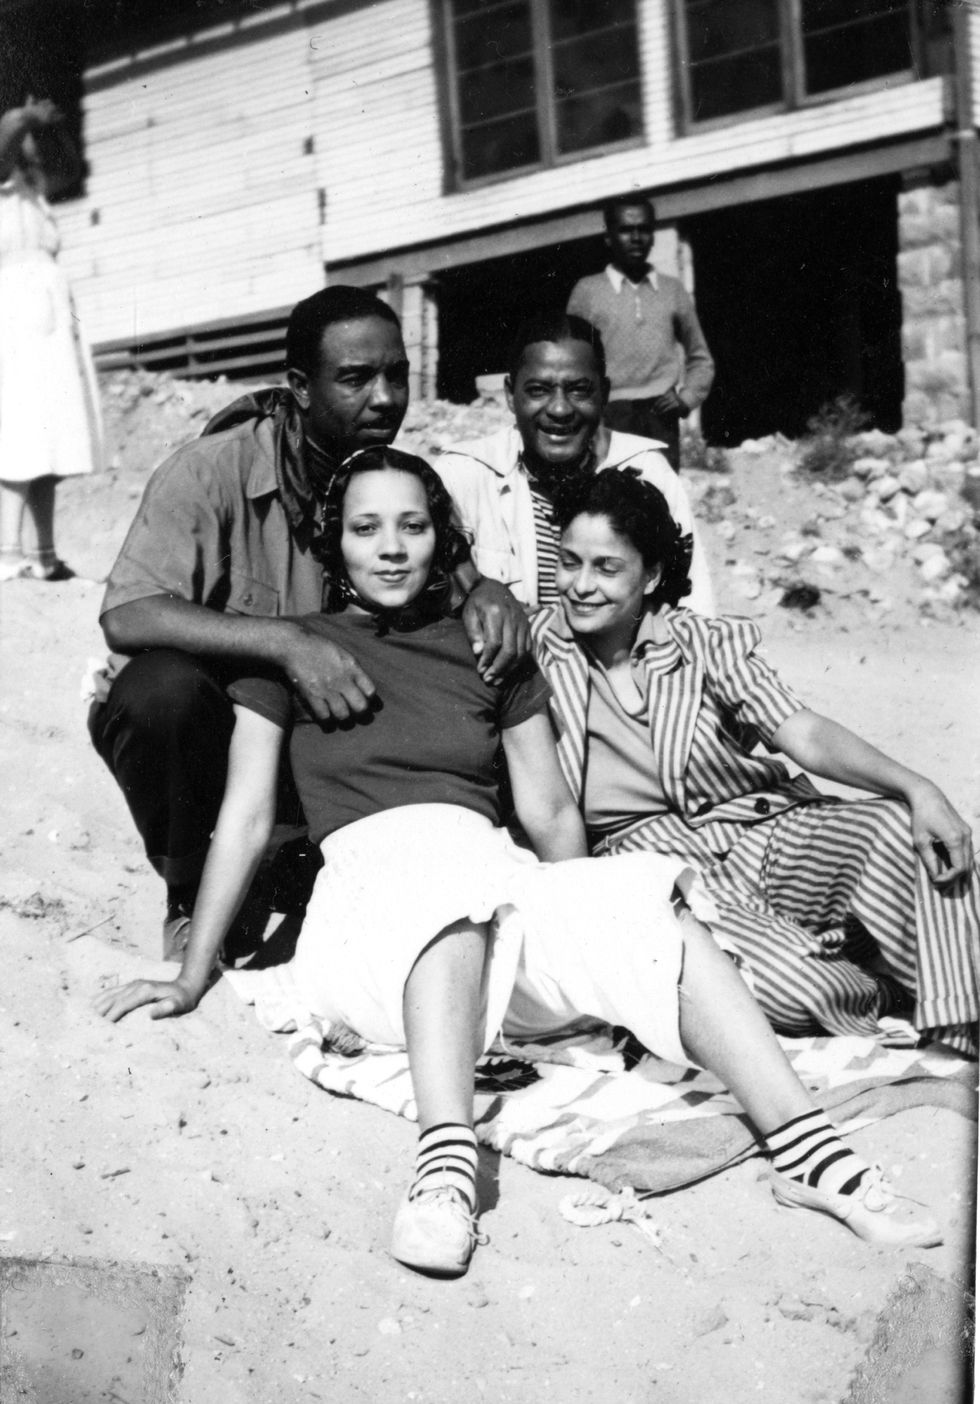 portrait of four unidentified people friends andor family members of future newspaper publisher john h sengstacke as they pose on the beach outside the idlewild club house, idlewild, michigan, september 1938 idlewild, known as the black eden, was a resort community that catered to african americans, who were excluded from other resorts prior to the passage of the civil rights act of 1964 photo by the abbott sengstacke family papersrobert abbott sengstackegetty images